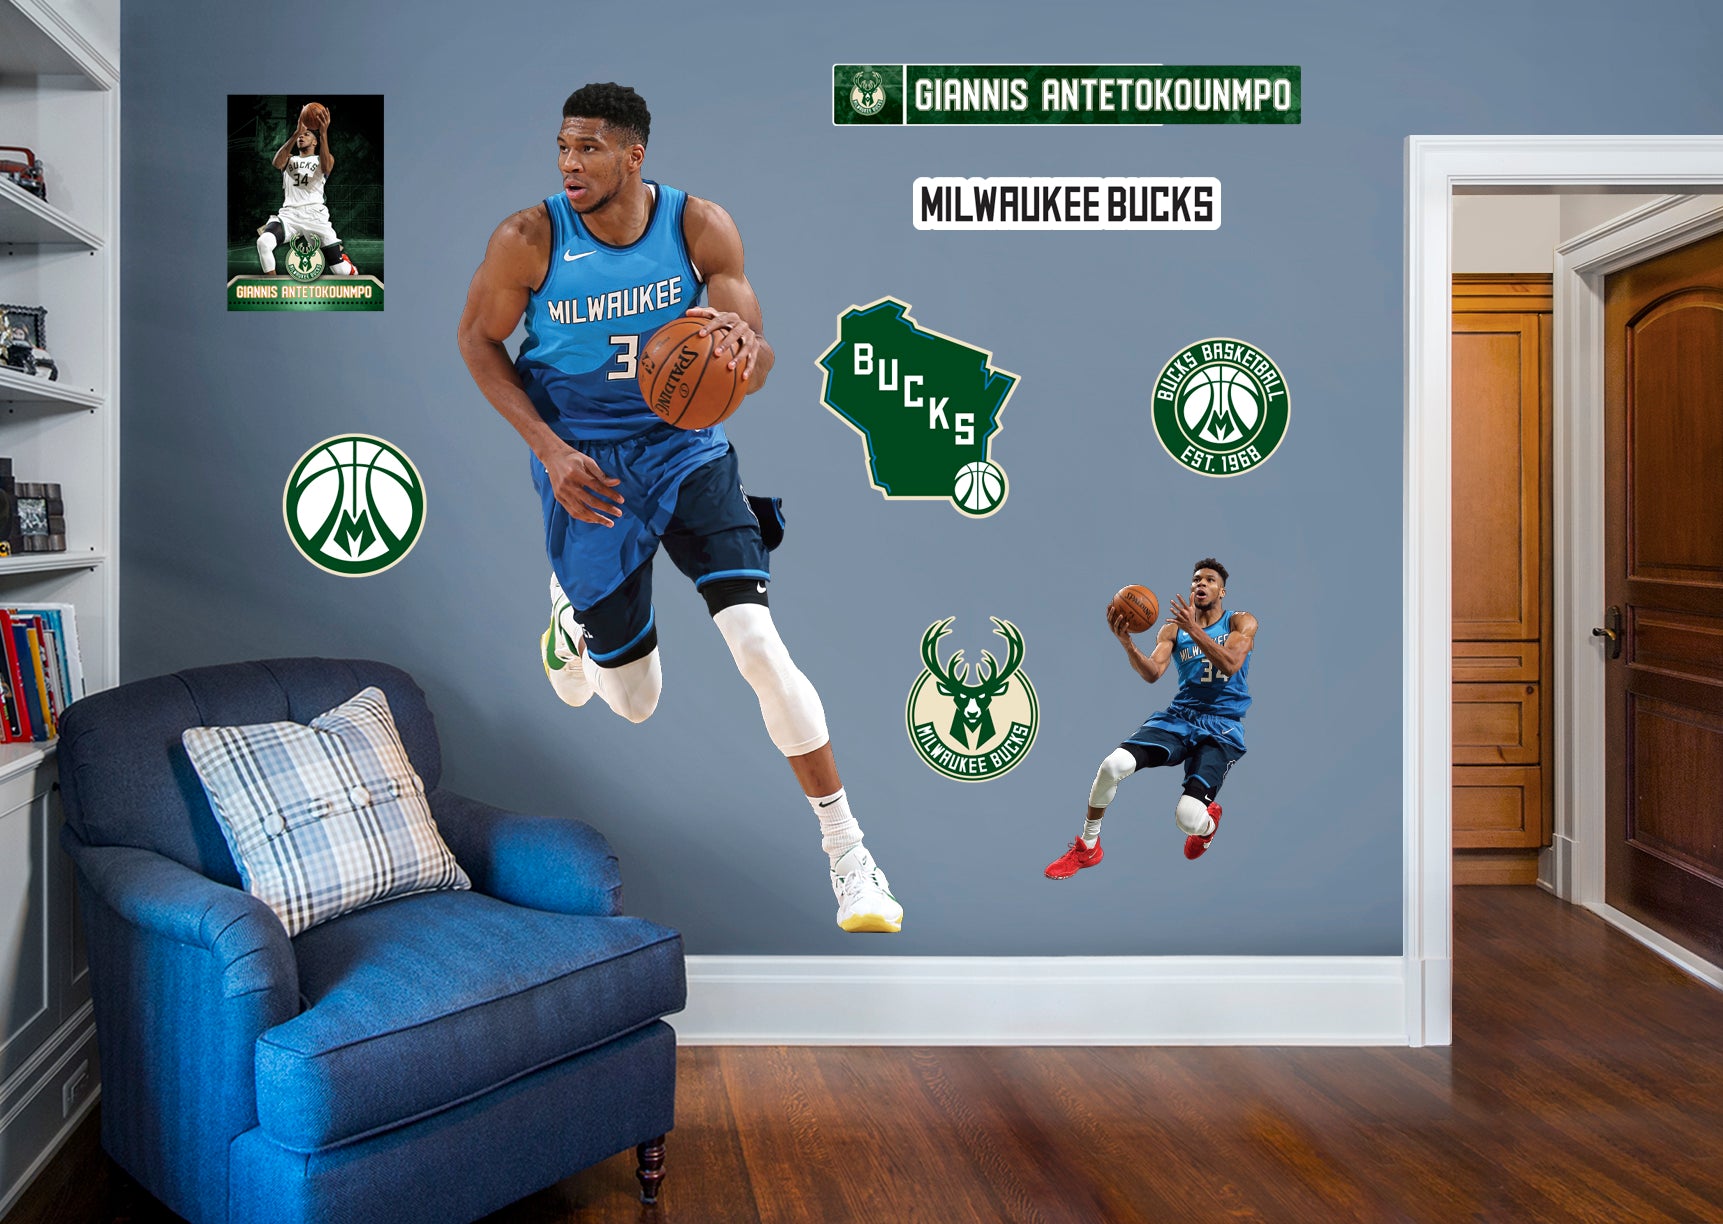 Giannis Antetokounmpo 2021 for Milwaukee Bucks - Officially Licensed NBA Removable Wall Decal Life-Size Athlete + 8 Decals (78"W